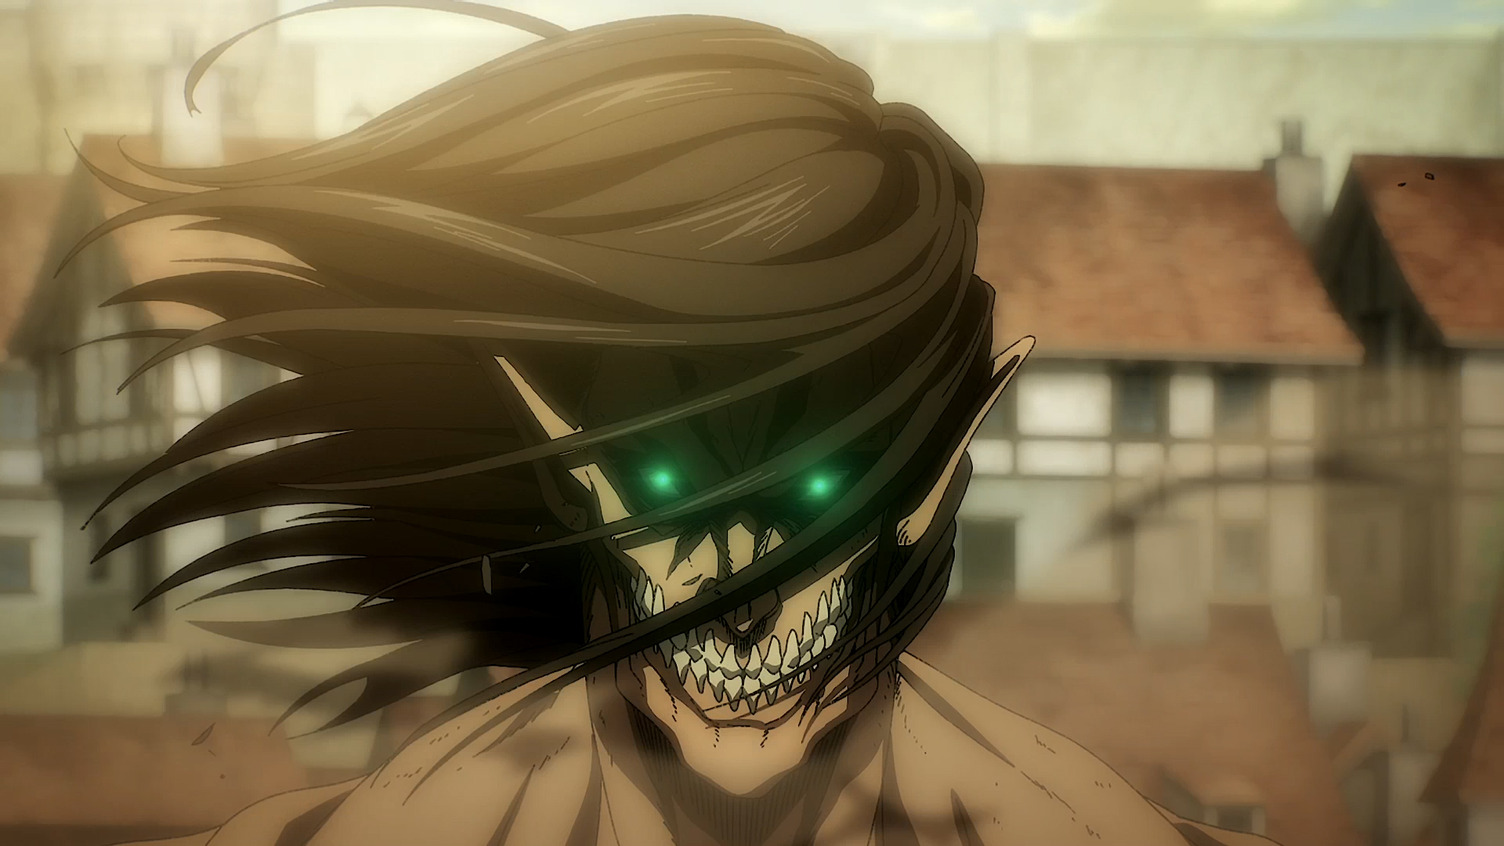 QUIZ: How Much Do You Know About Attack on Titan?